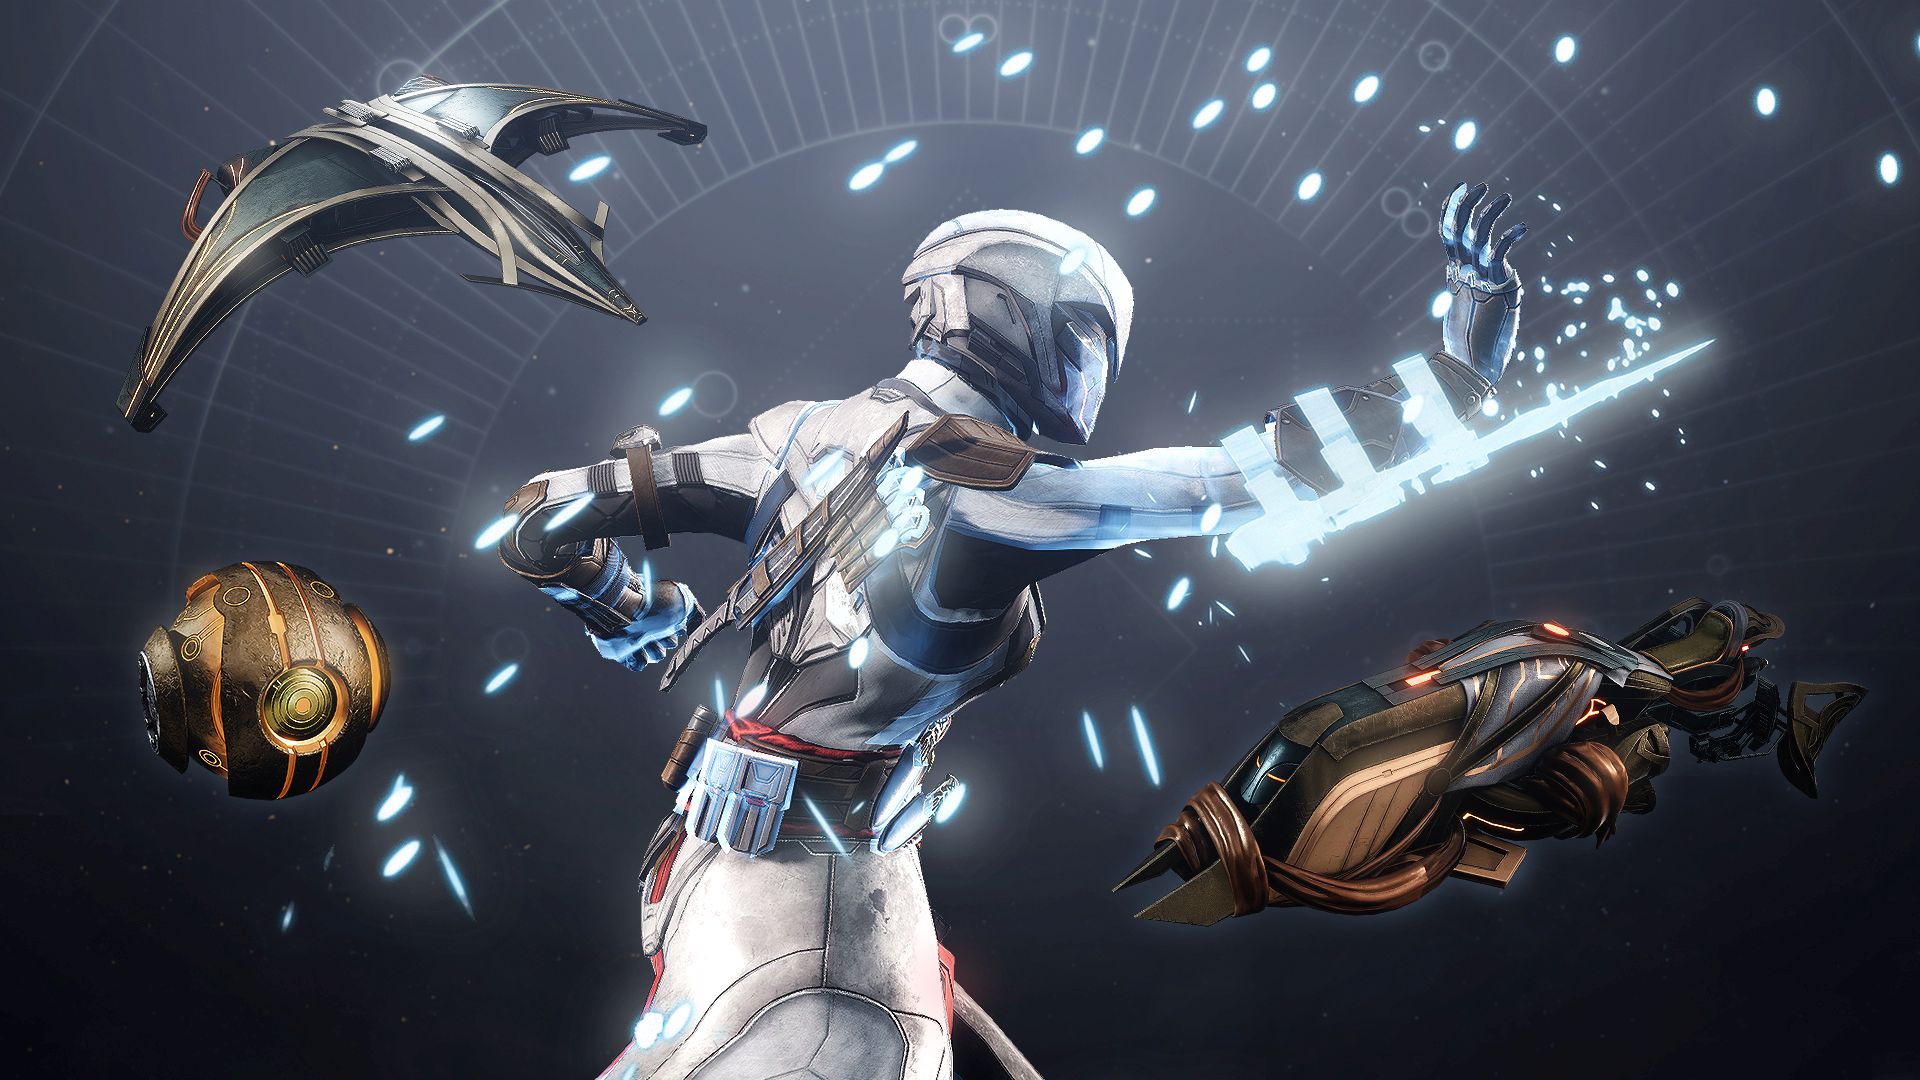 Assassin's Creed Valhalla - Destiny 2 Cosmetics Pack is now